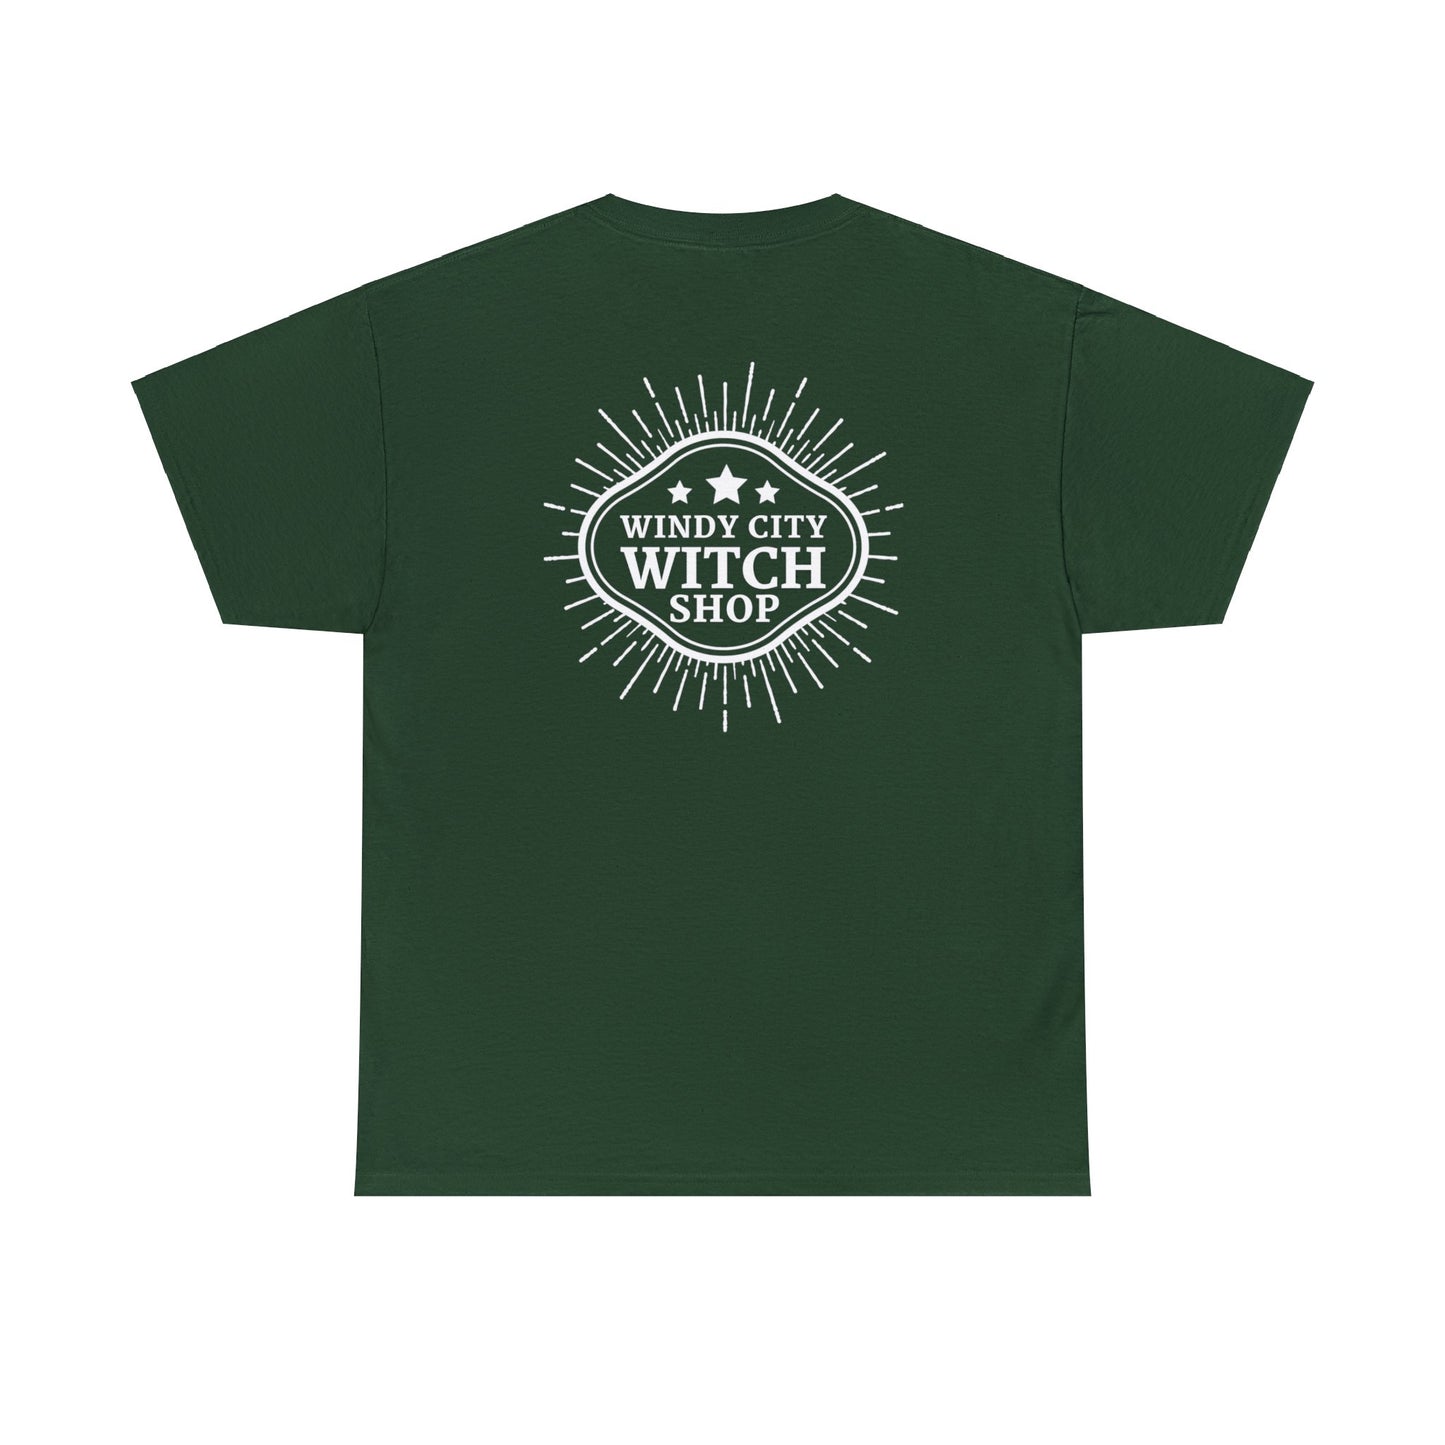 Witch the VOTE Unisex Cotton Tee